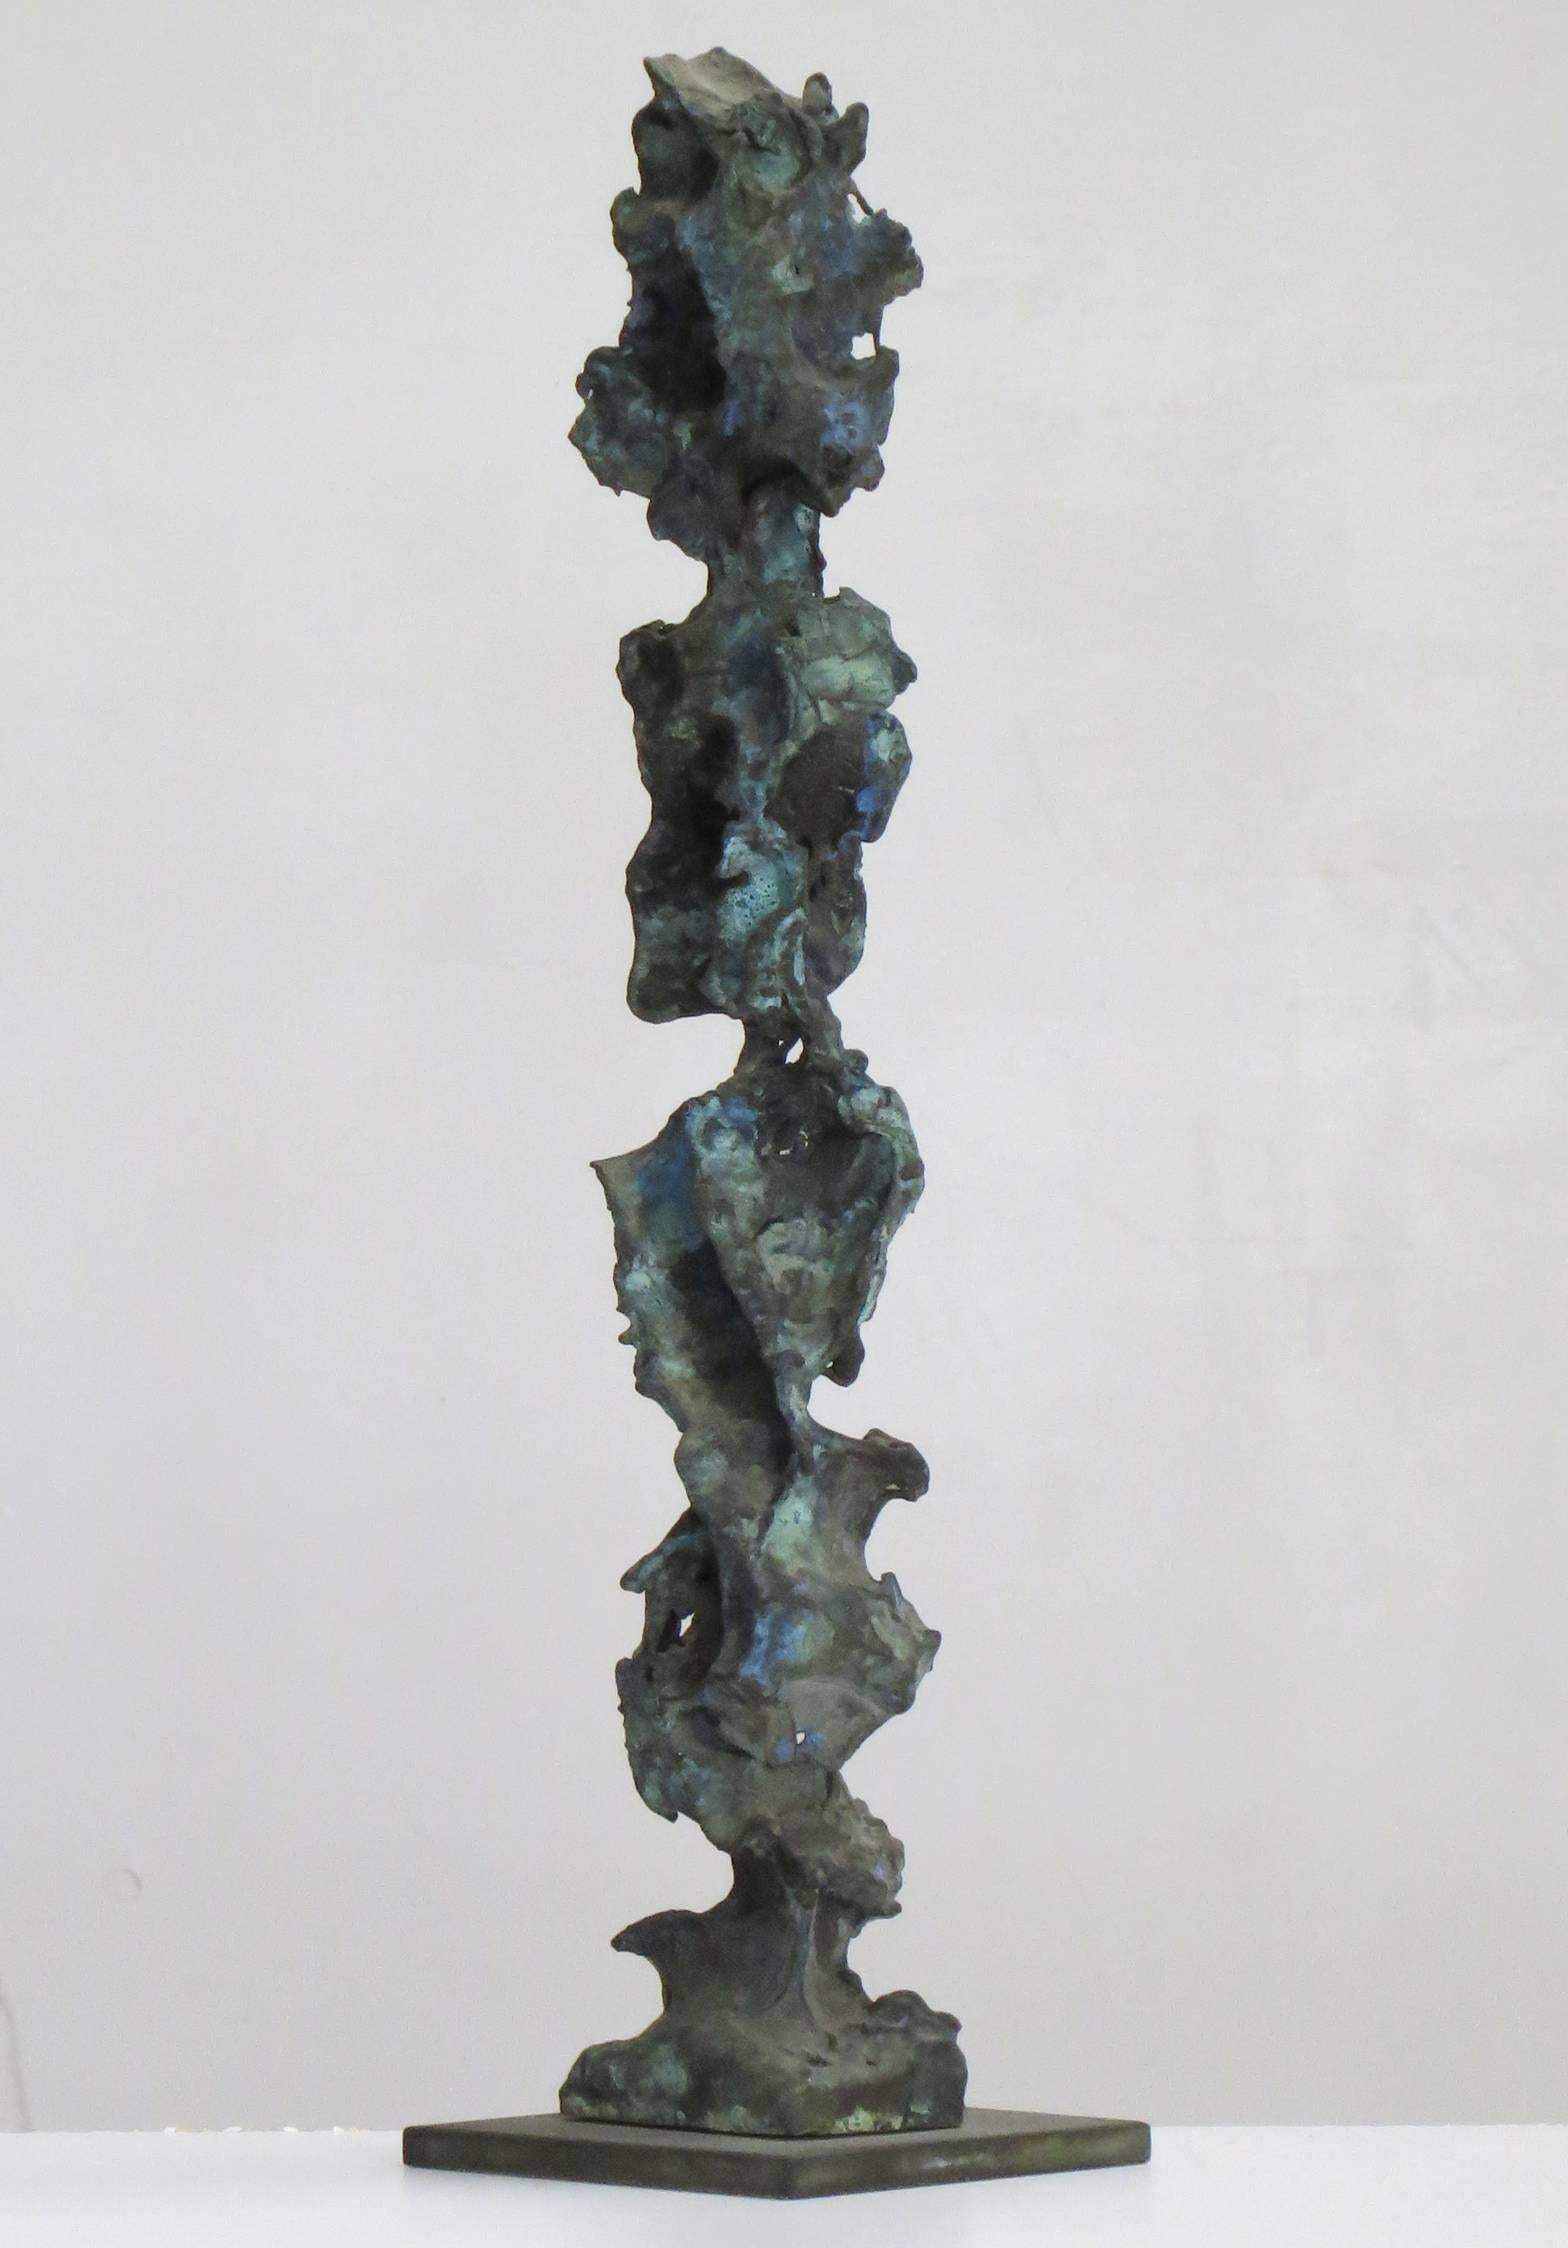 Stoic, intricately carved, textured tabletop bronze with a blue green patina, is varied from every viewpoint. To Kalish, the most important factor in determining what a sculpture will become is the structural principle. The juxtaposition of forms